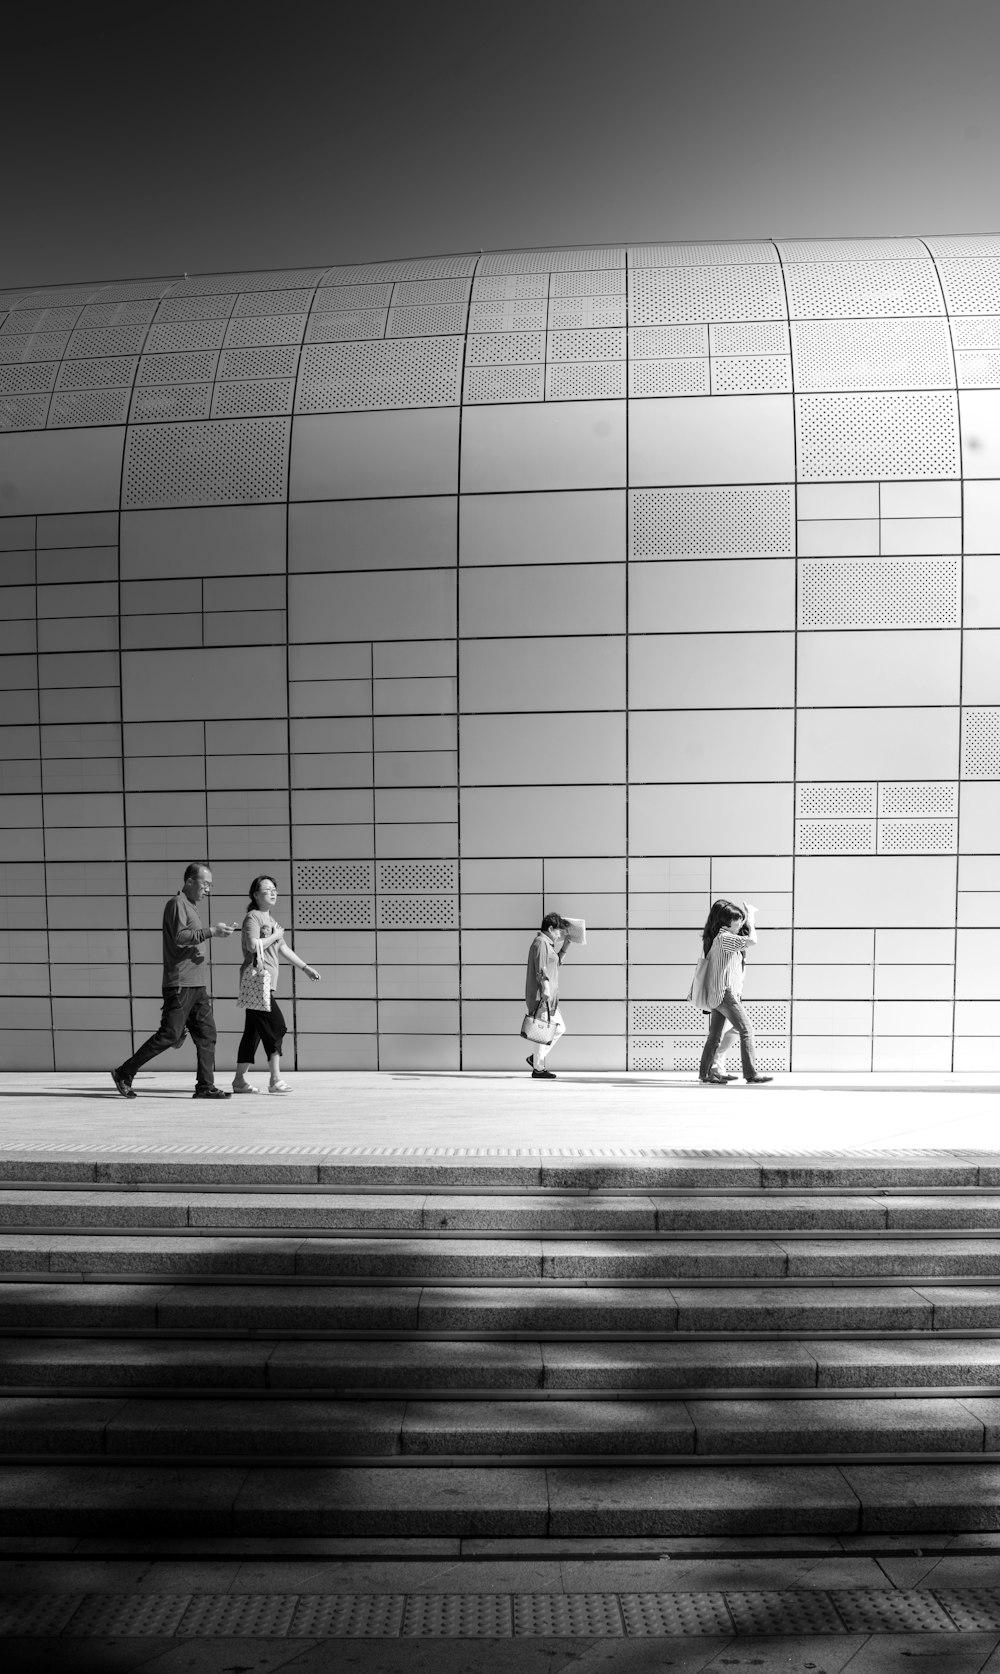 grayscale photo of people walking near building